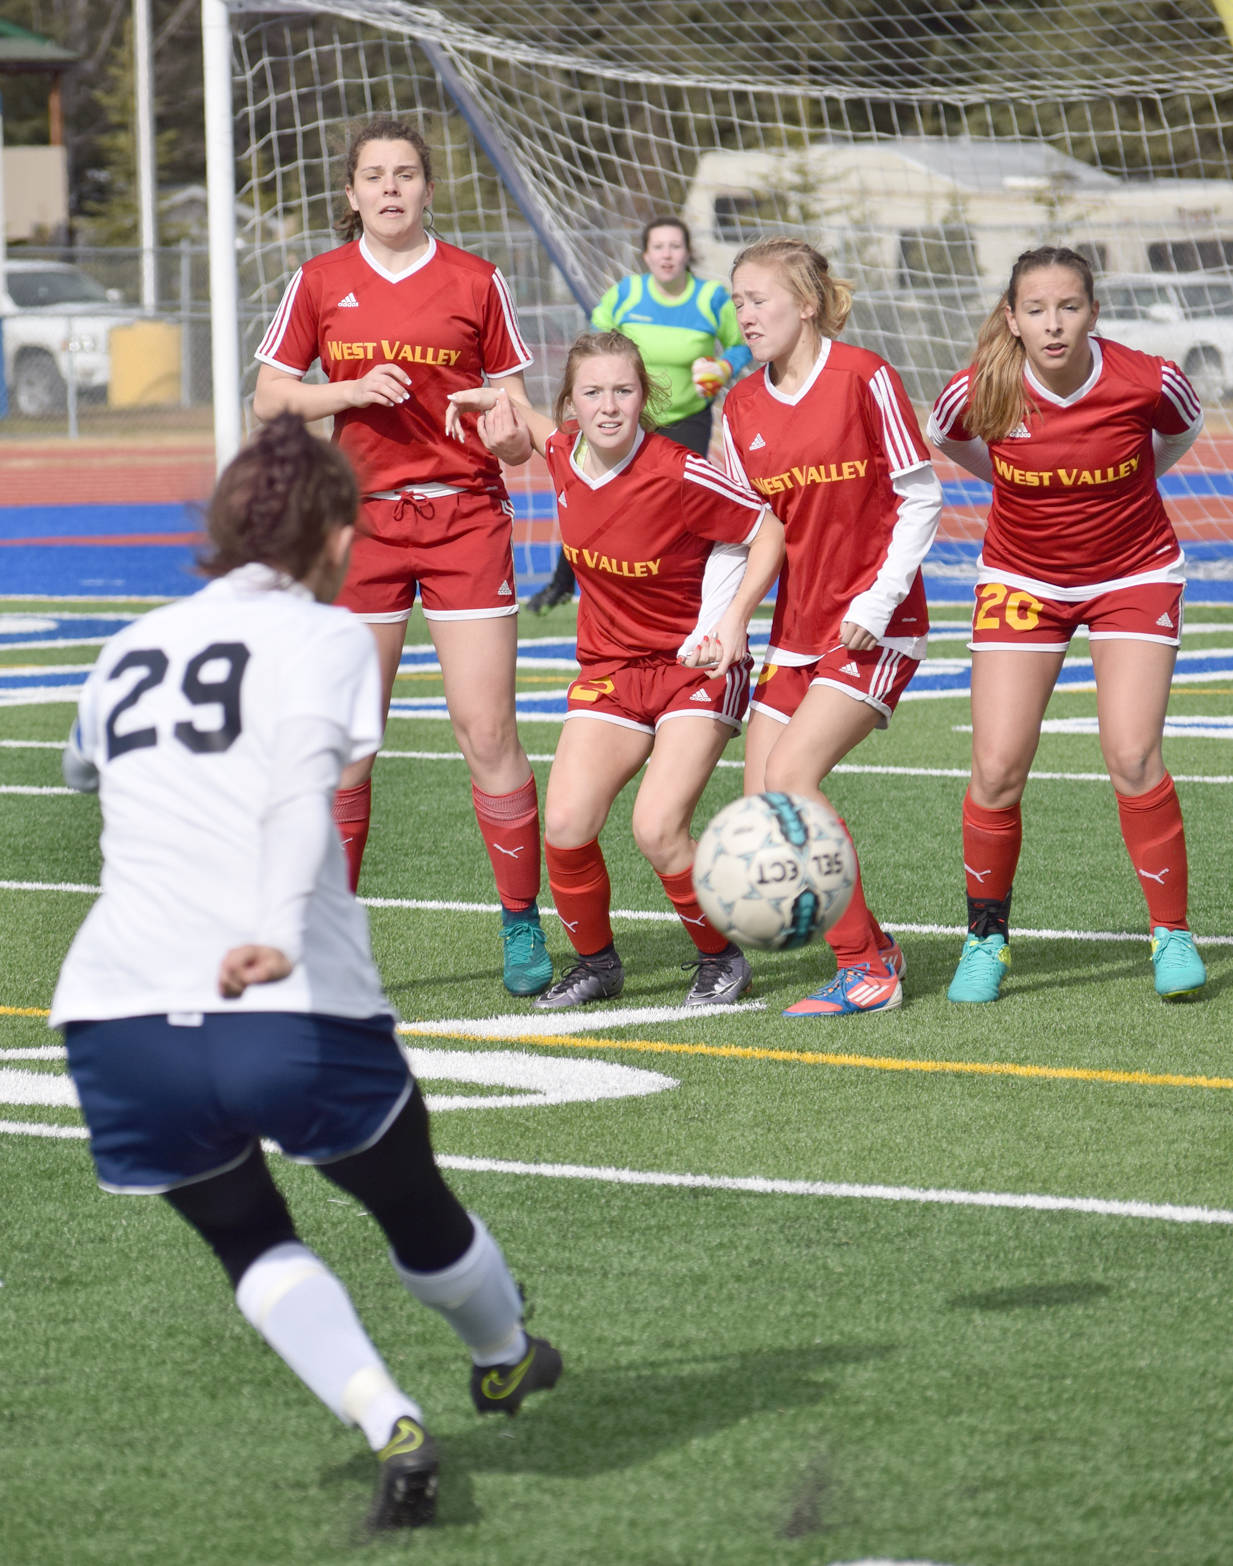 Soldotna’s Abi Tuttle kicks into the West Valley wall of Hannah Olsen, Riley Baumgartner, Kennedy Atlee and Tarryn Clark, backed by goalie Kaleigh Sparks, Wednesday, April 28, 2017, at Soldotna High School. The shot went just wide. (Photo by Jeff Helminiak/Peninsula Clarion)